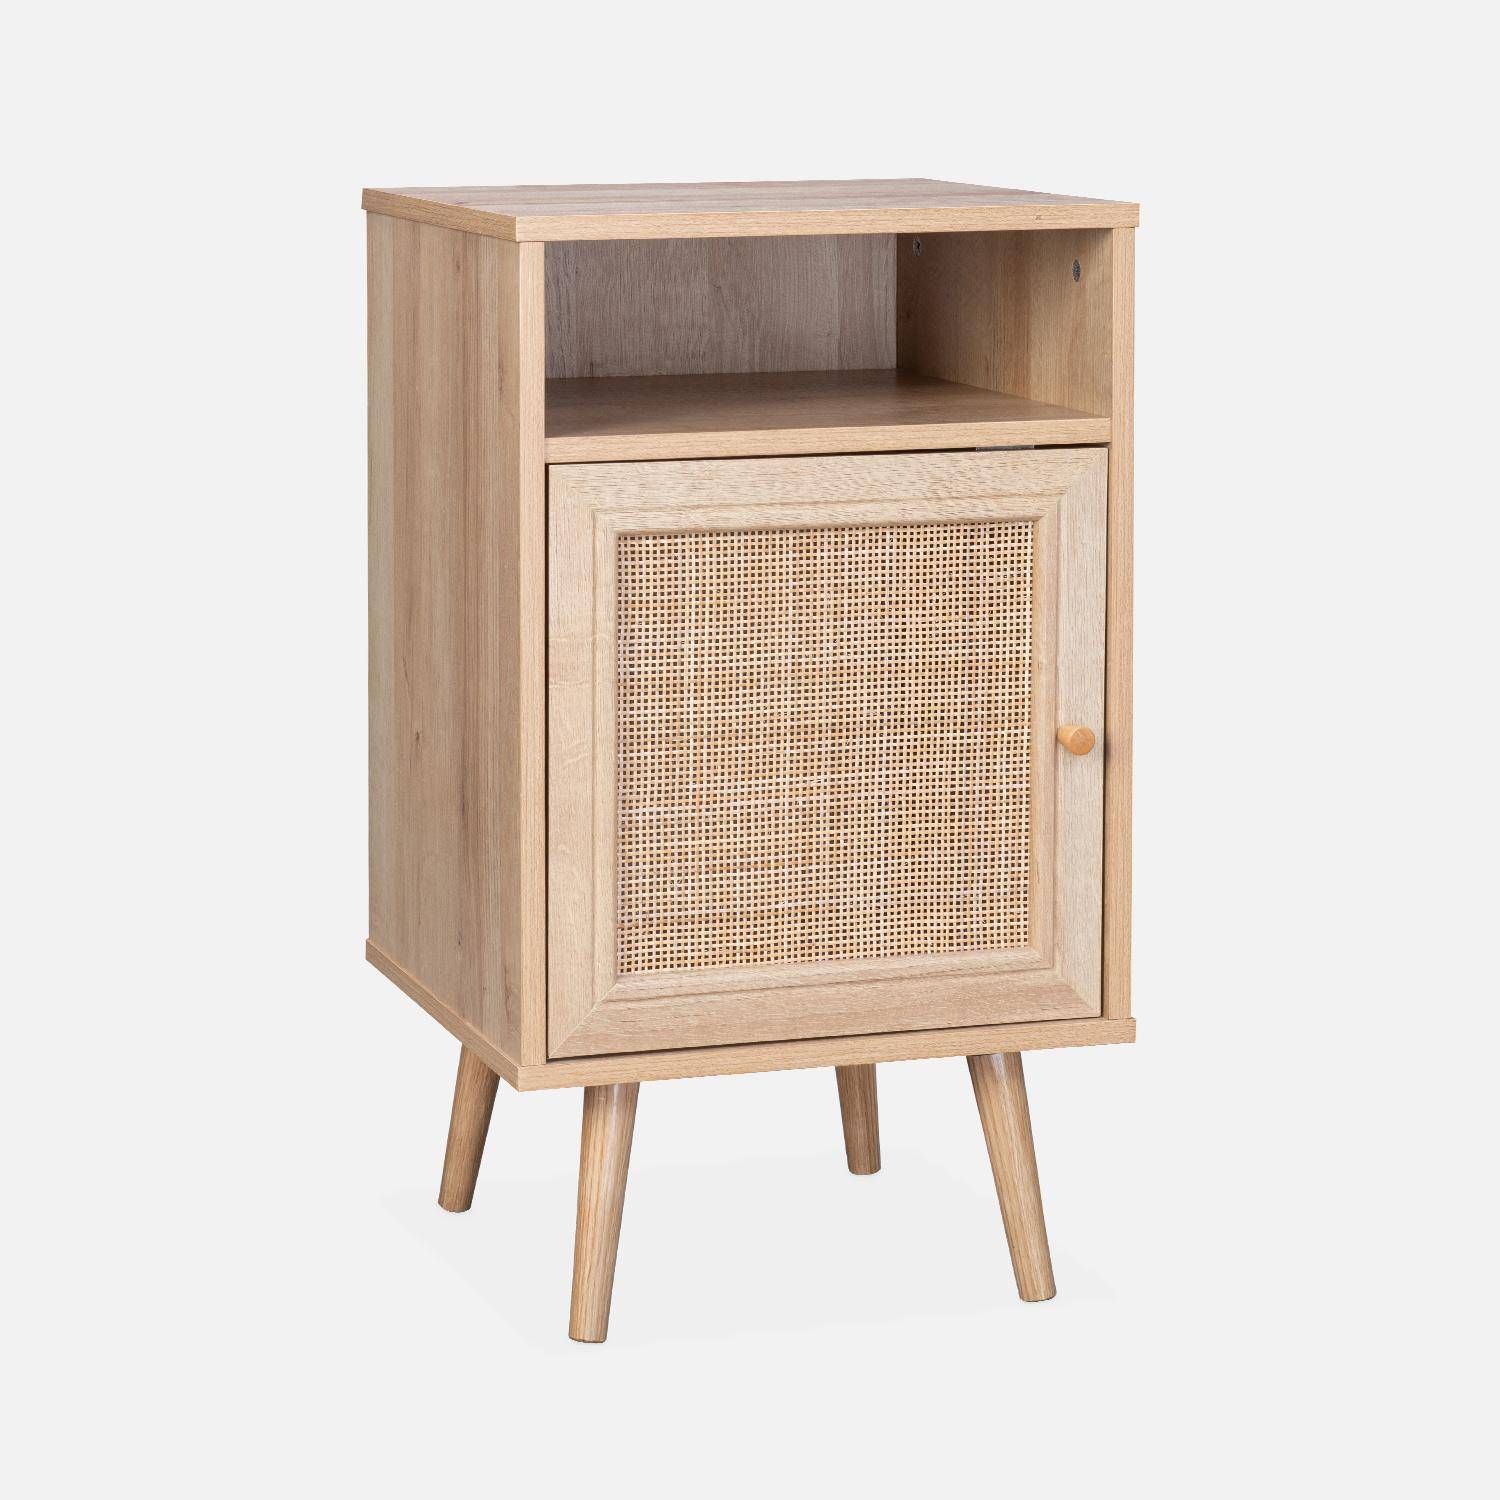 Pair of Scandi-style wood and cane rattan bedside tables with cupboard, 40x39x70cm - Boheme - Natural Wood colour,sweeek,Photo5